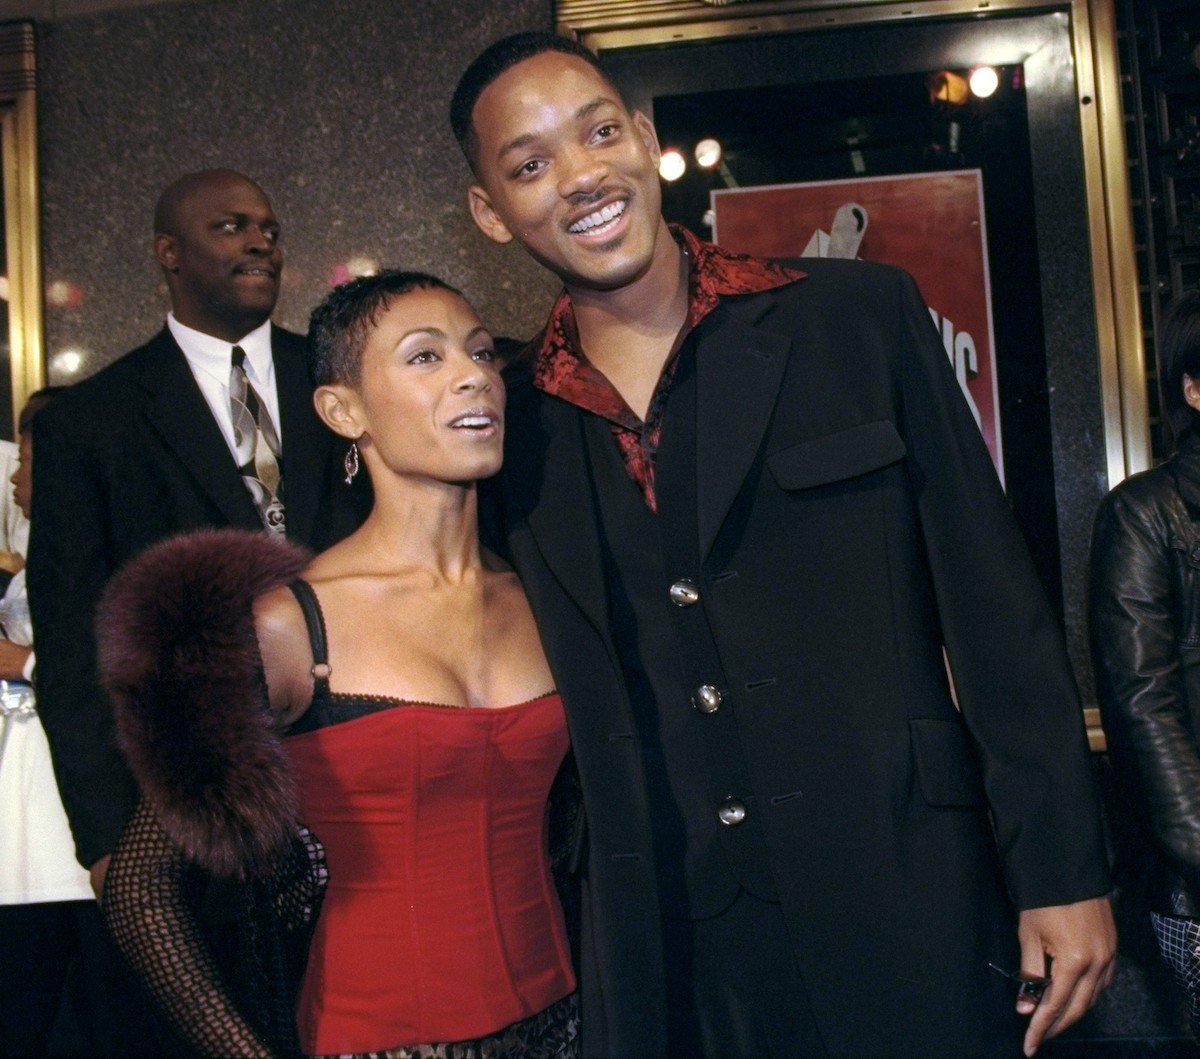 Will Smith and Jada Pinkett attend the MTV Awards in 1997